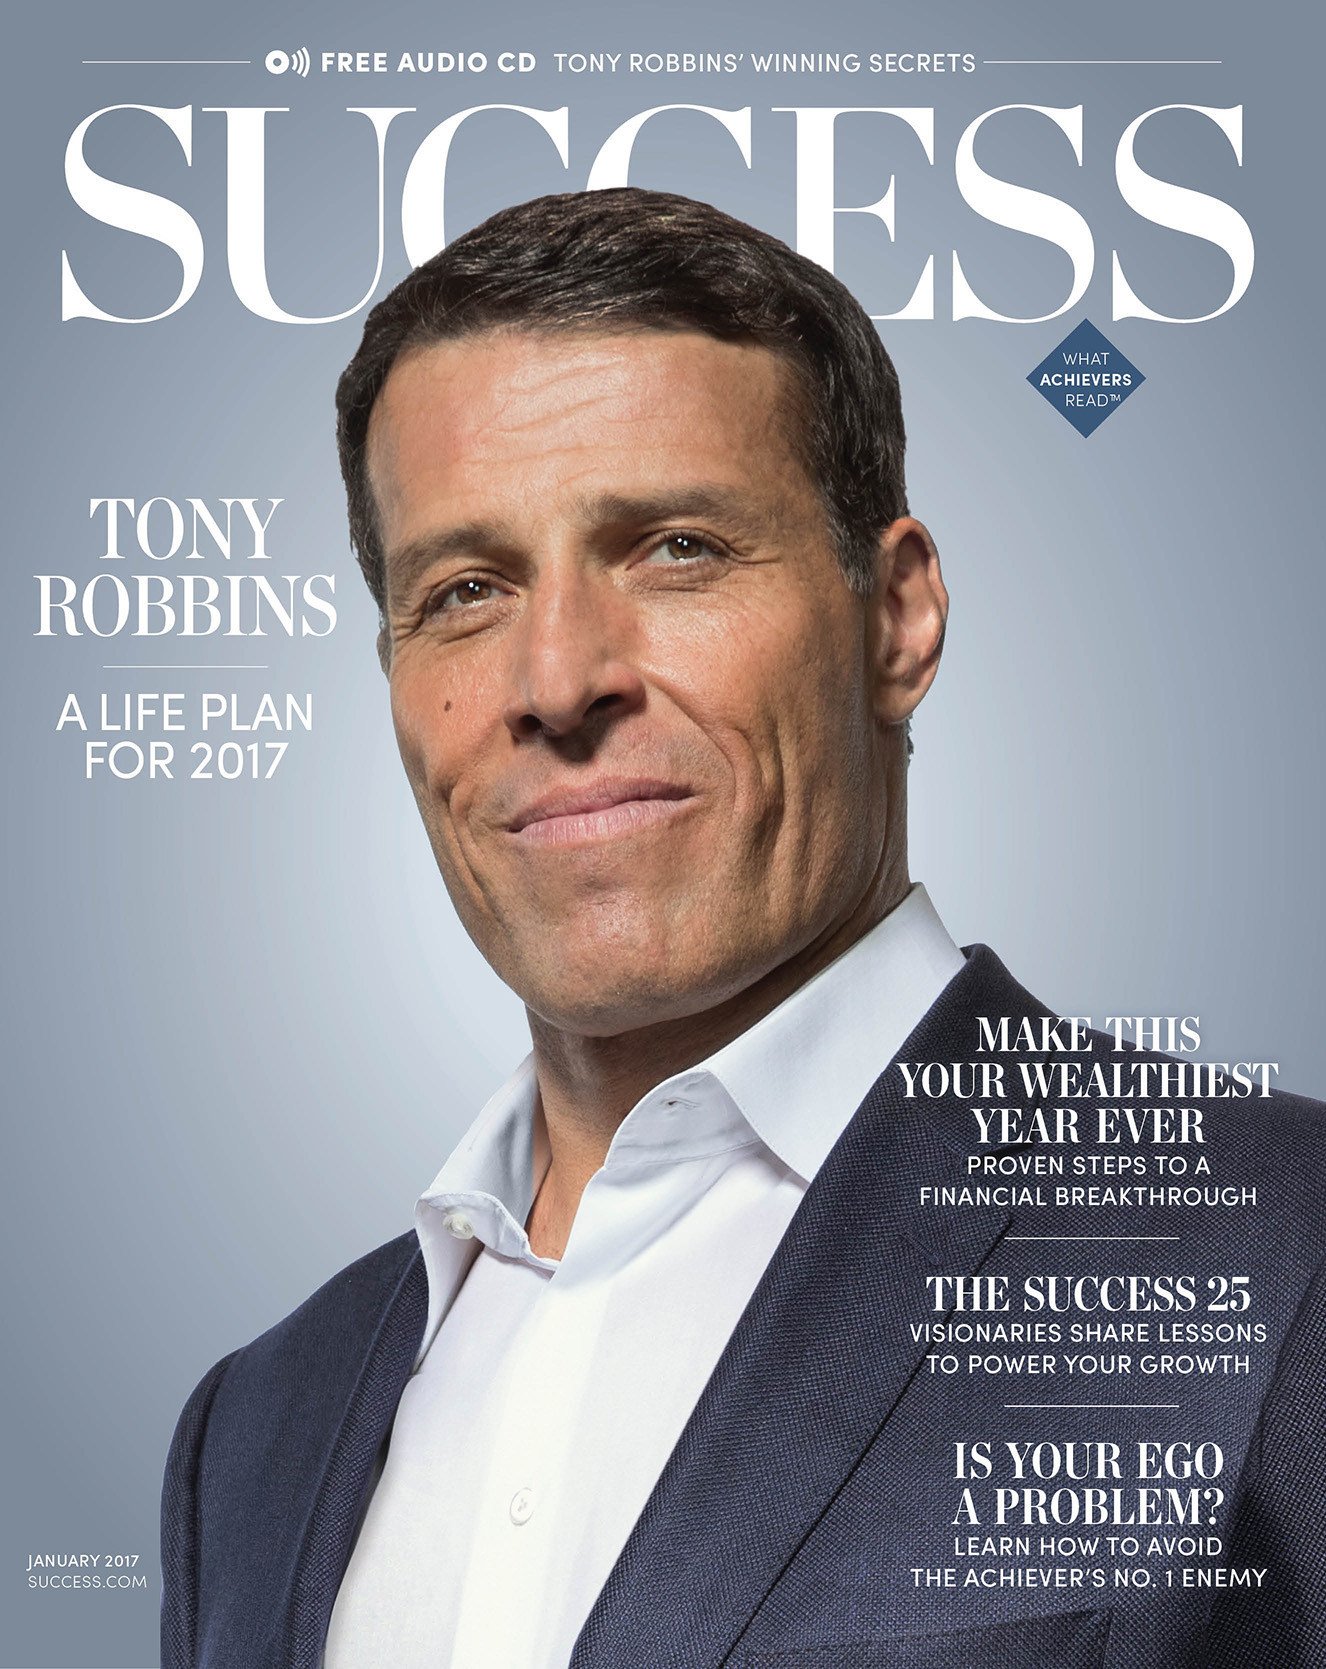 Tony Robbins: 25 Things You Don't Know About Me